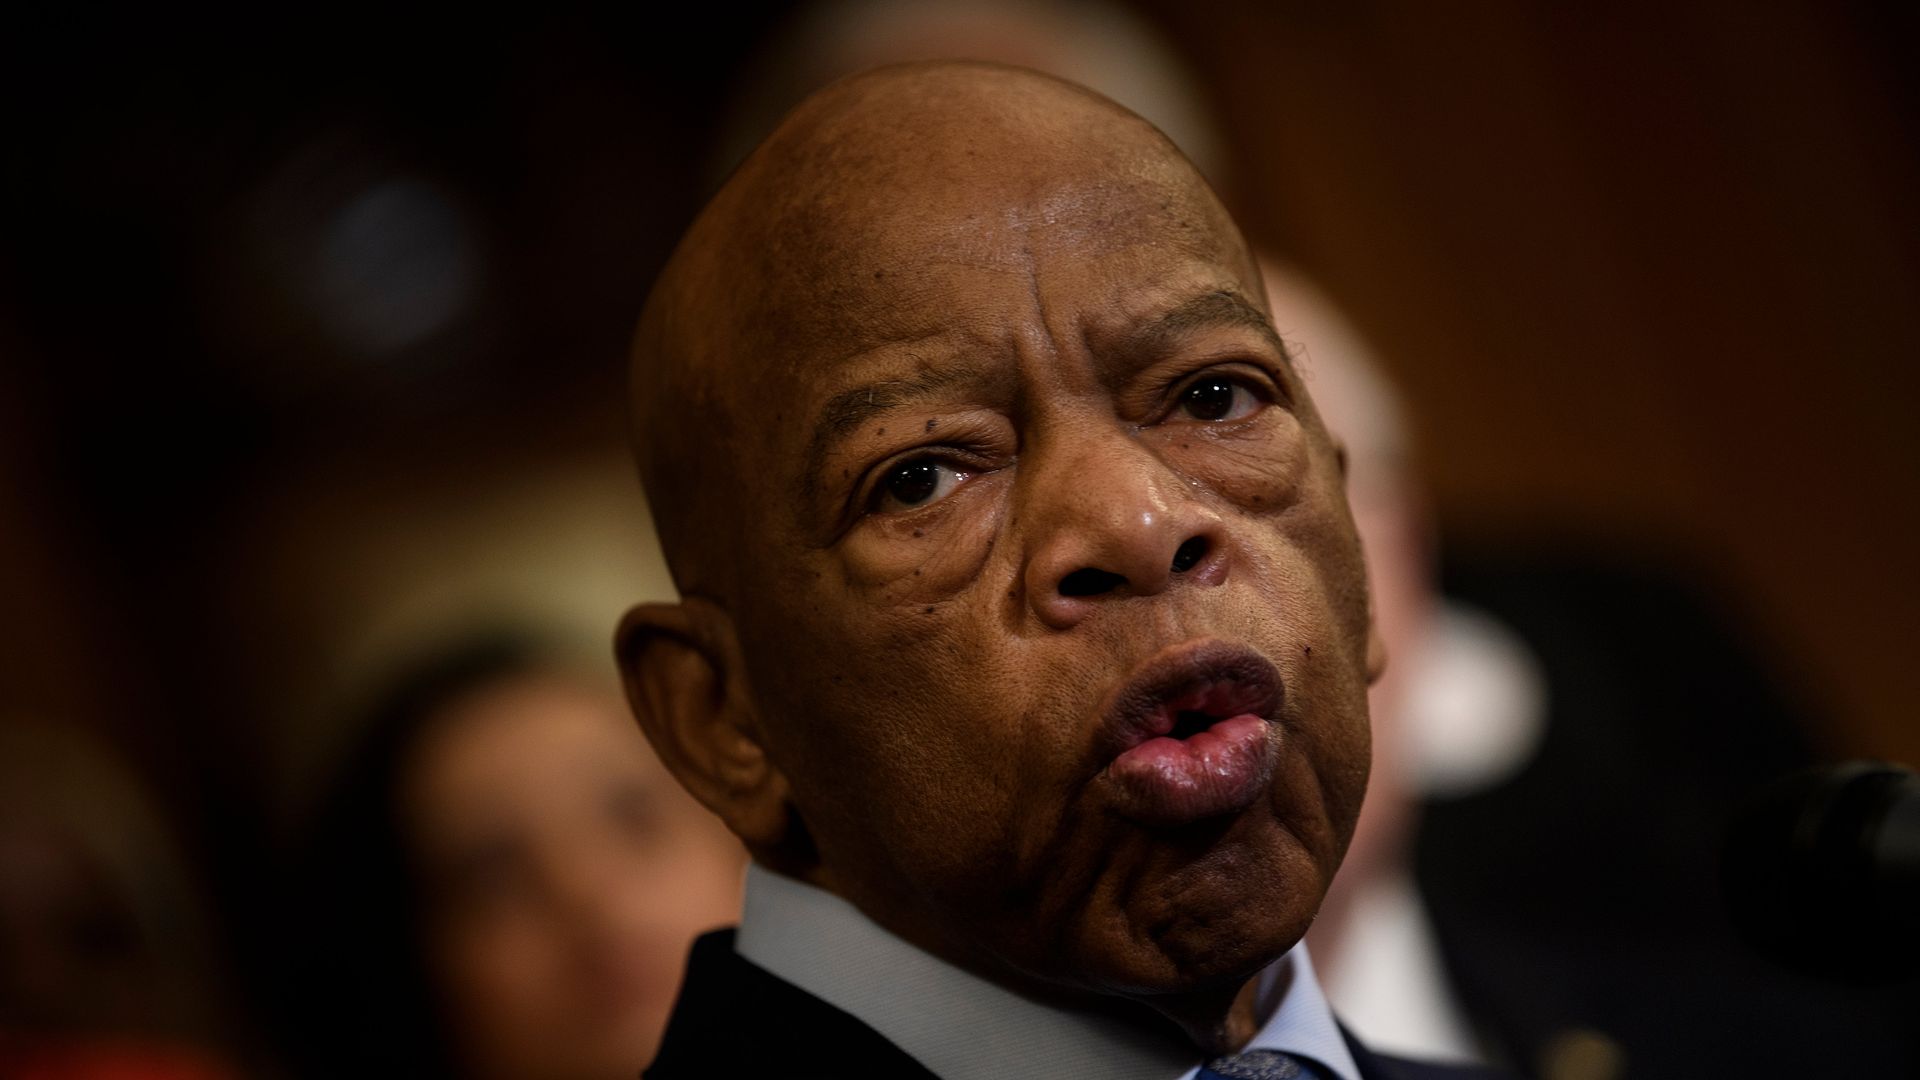 Rep. John Lewis (D-GA) speaks during a press conference about voting rights on Capitol Hill December 6, 2019